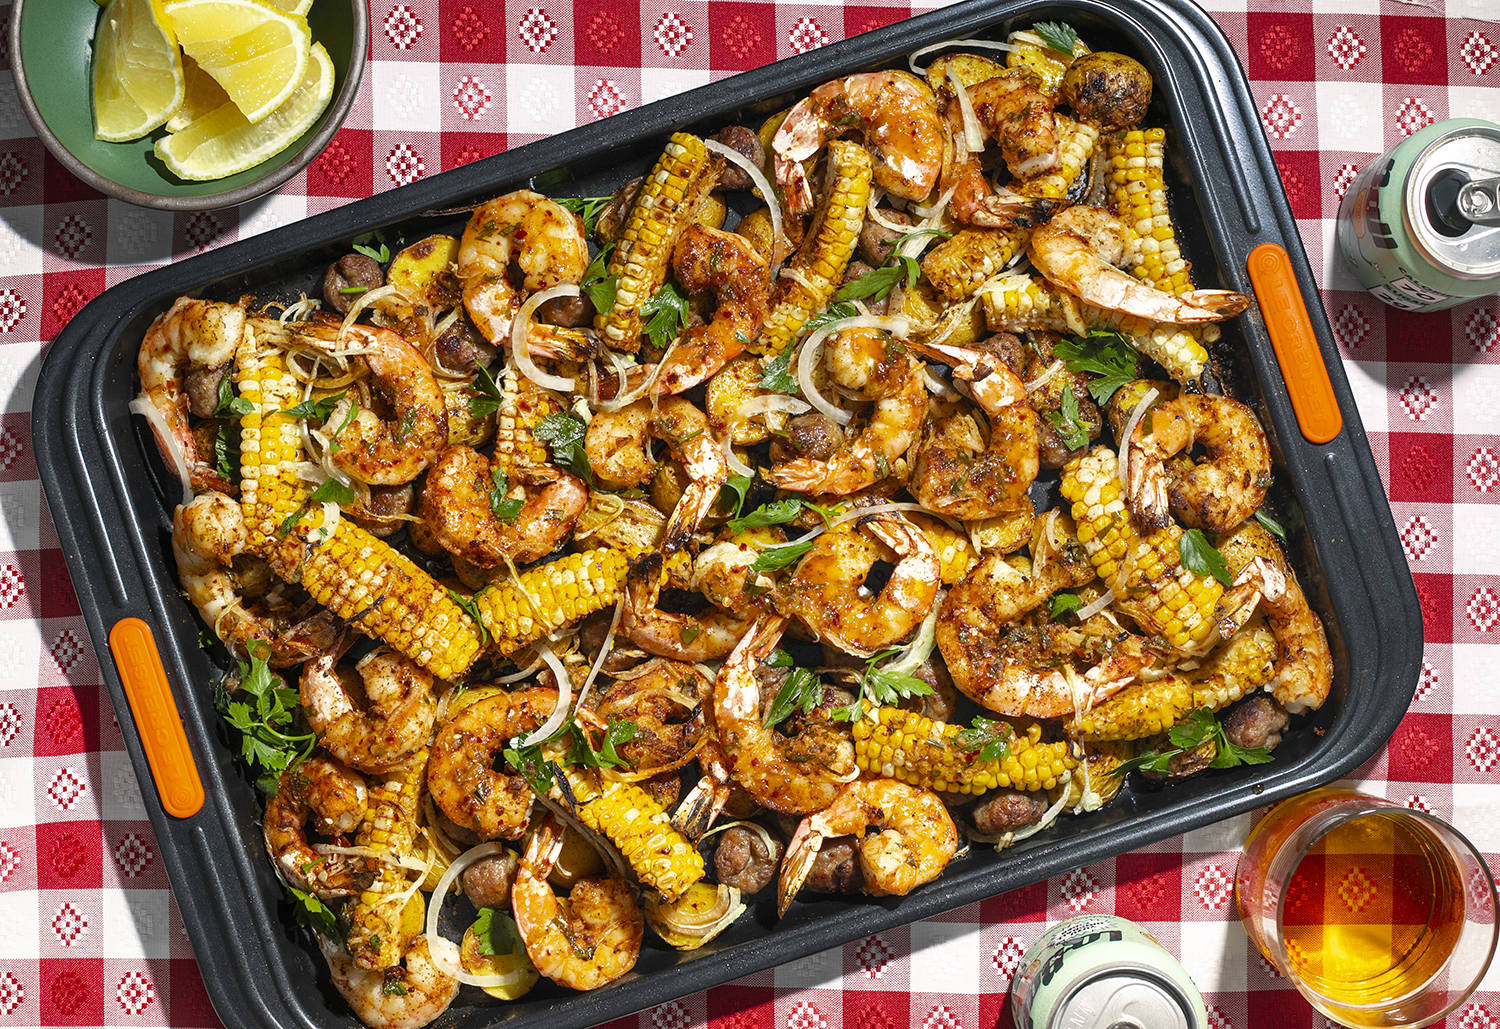 Sheet Pan Shrimp “Boil” with Sausage Meatballs and Spicy Corn Ribs